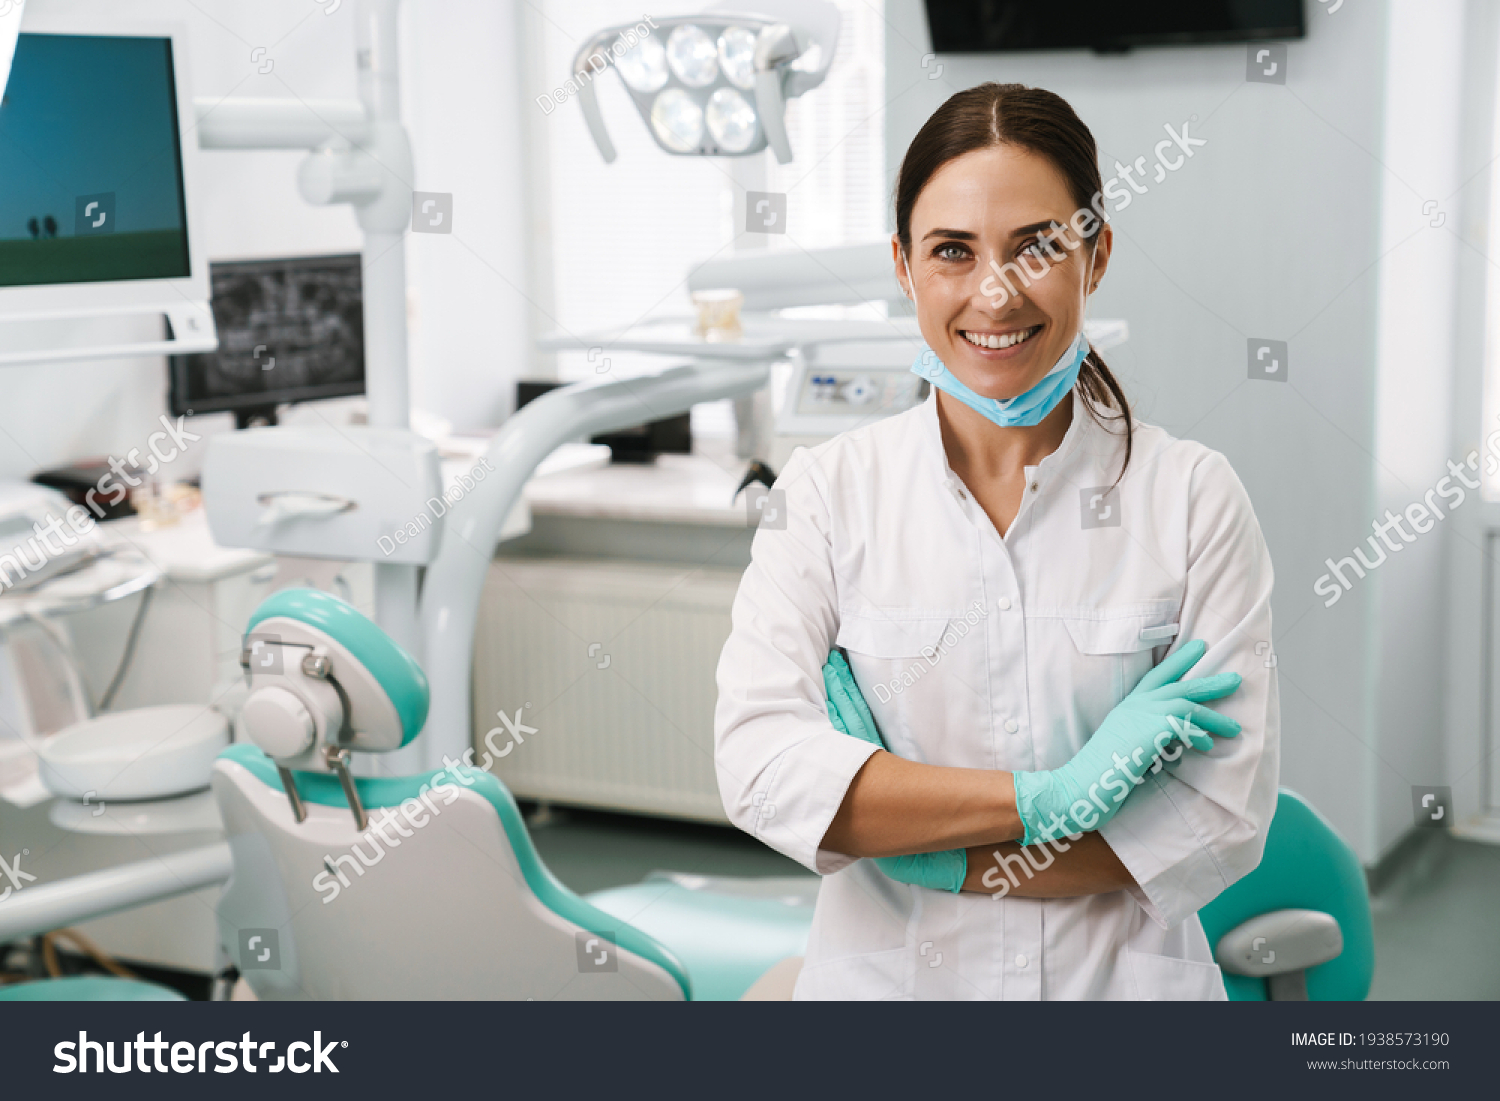 European mid dentist woman smiling while standing in dental clinic #1938573190